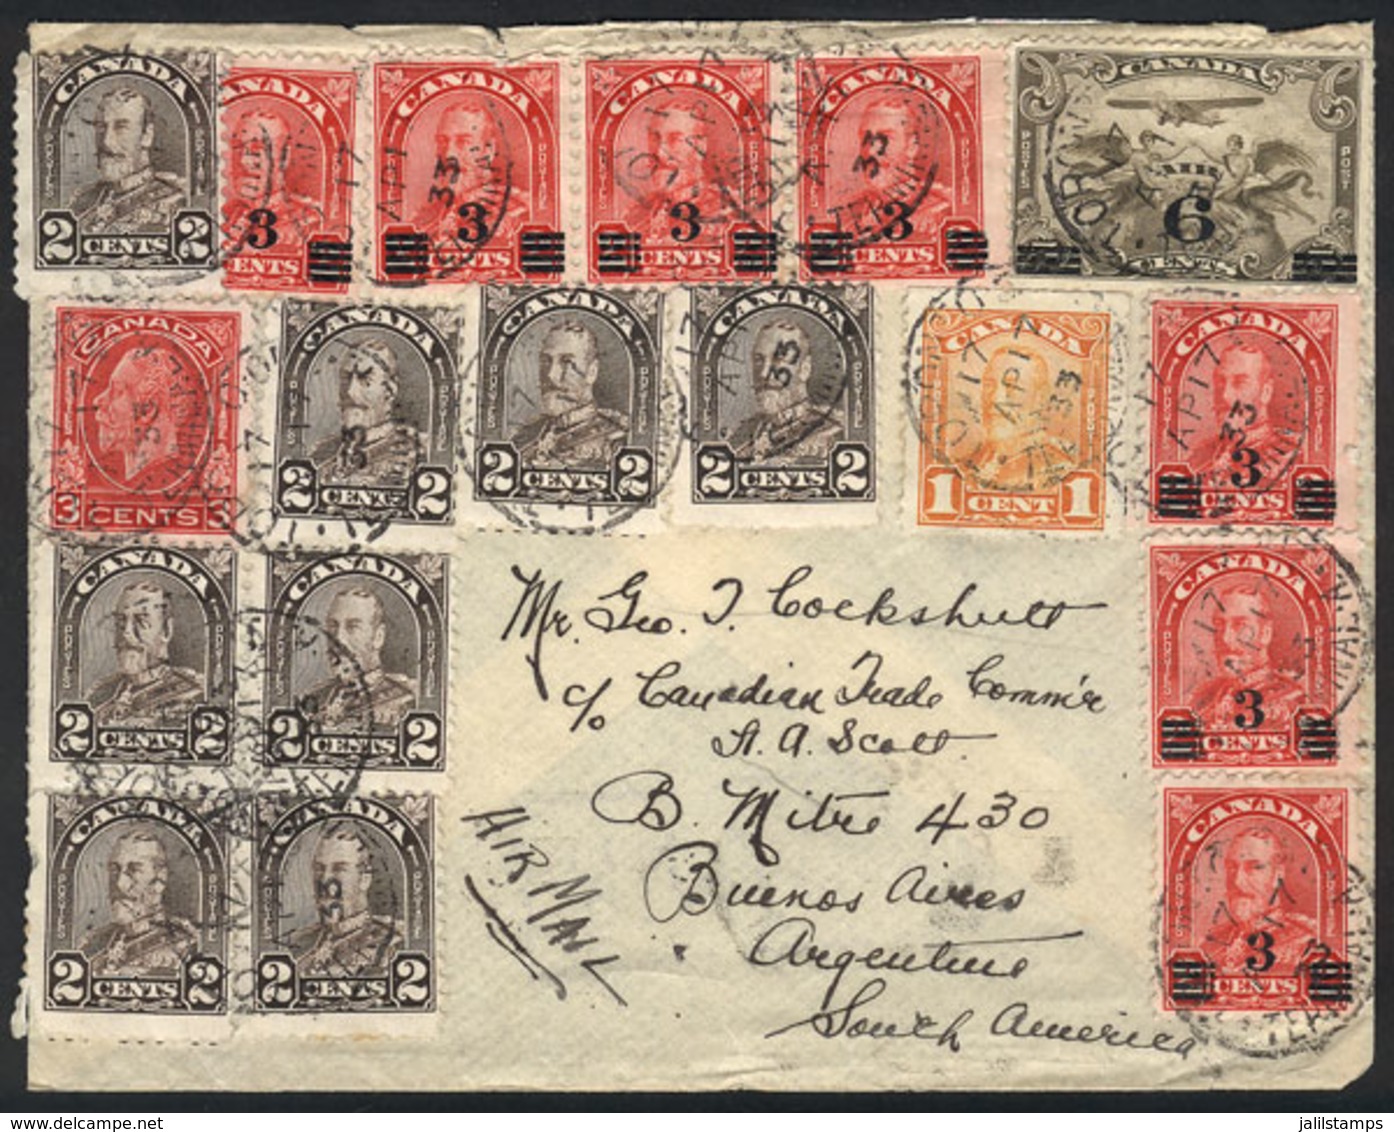 CANADA: Airmail Cover Sent From Toronto To Bueno Aires On 17/AP/1933, Spectacular Postage, Very Nice! - Covers & Documents